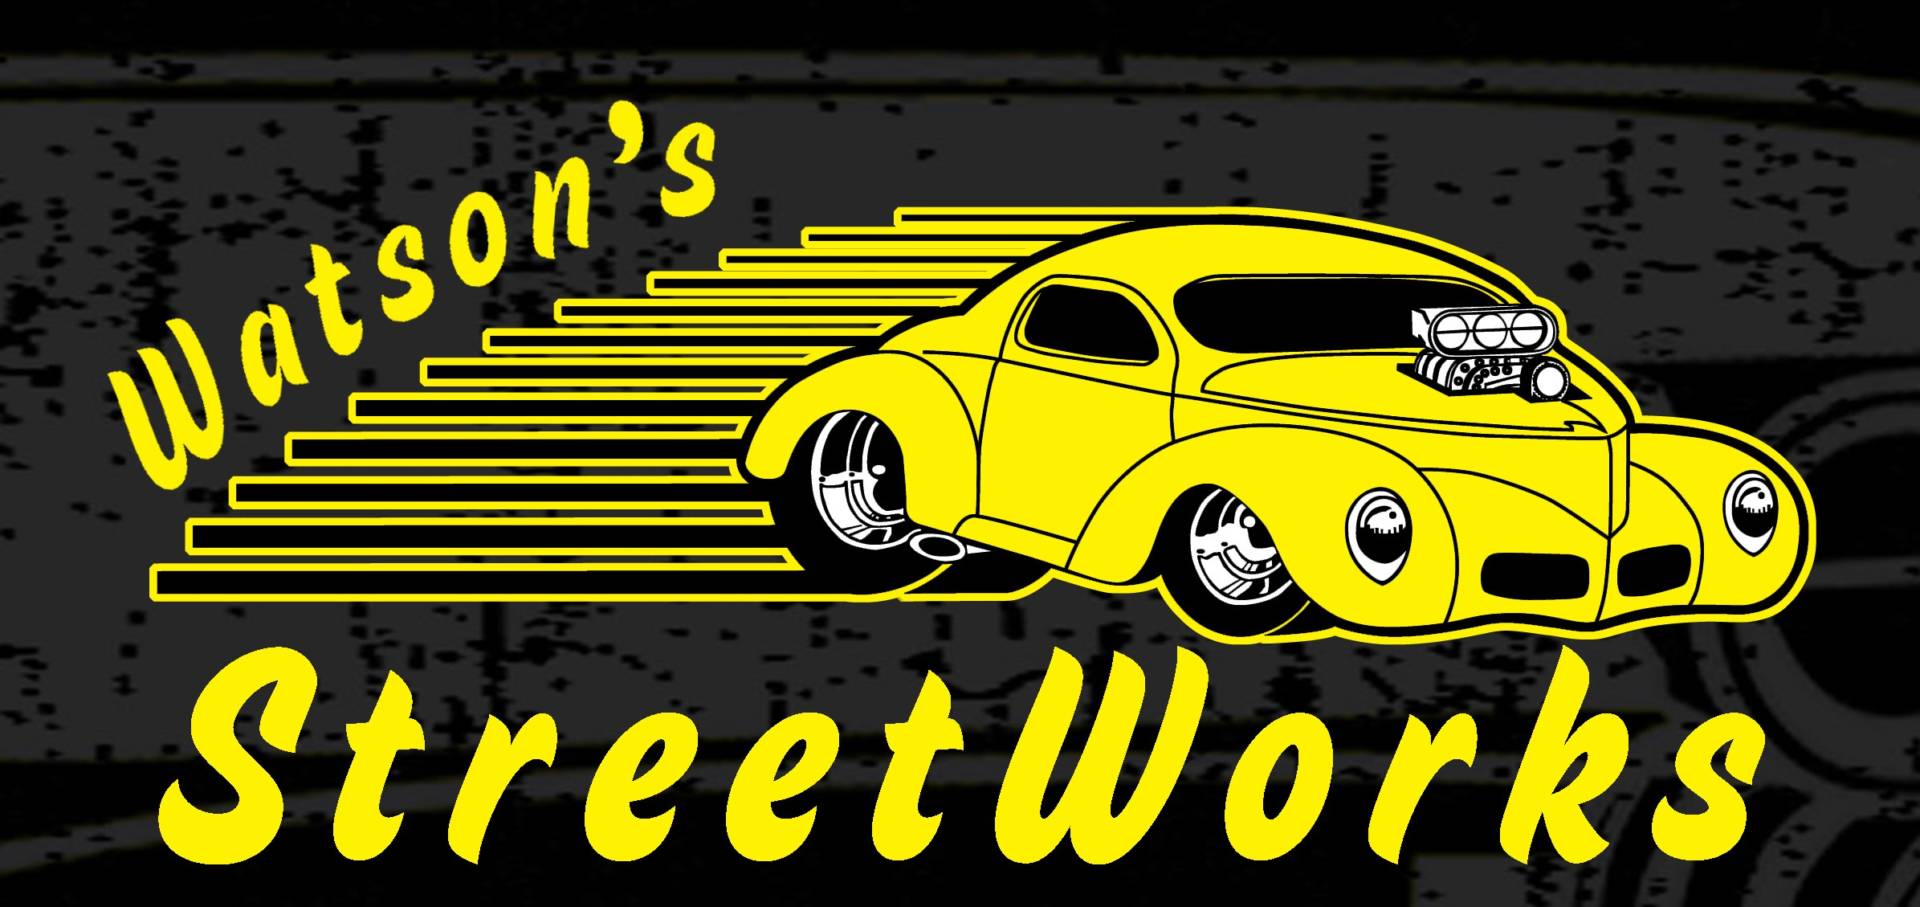 face plate: Watson's StreetWorks